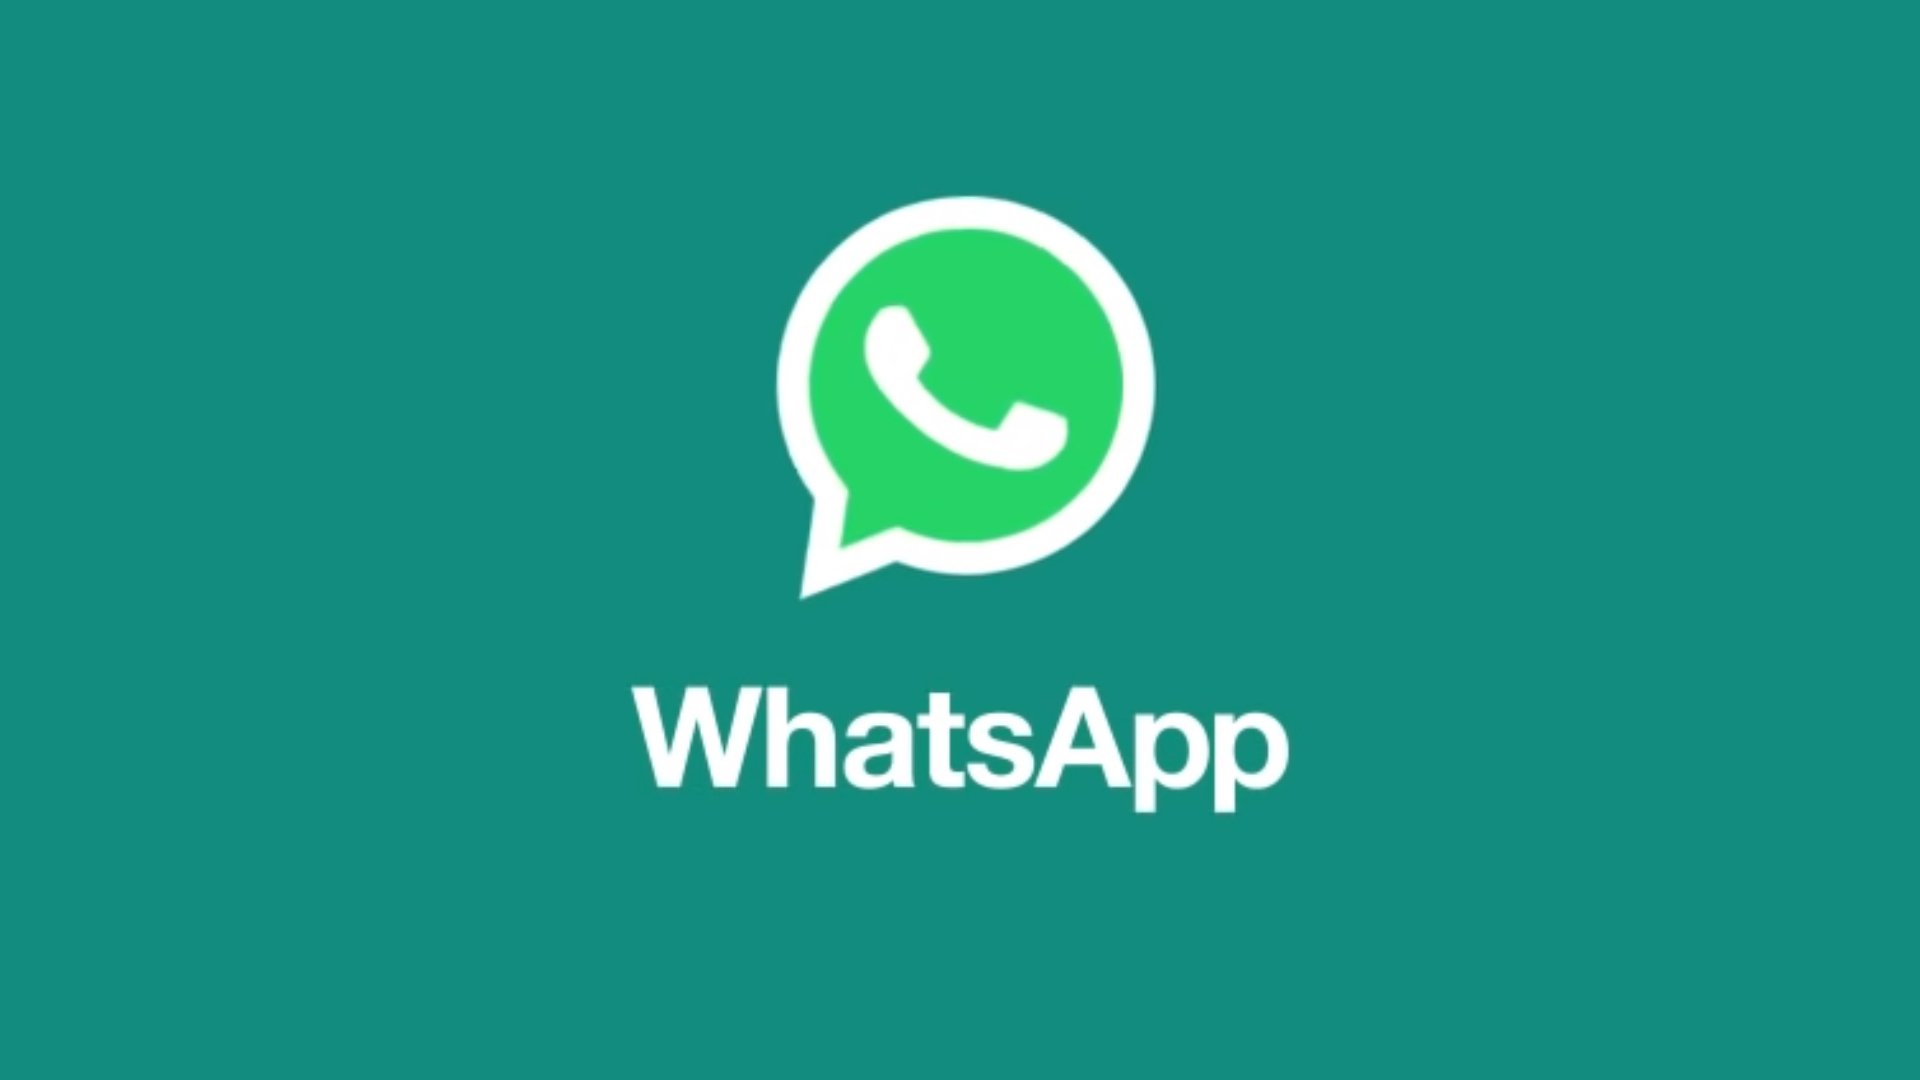 Facing issues on WhatsApp in Dual Messenger? Check out this solution